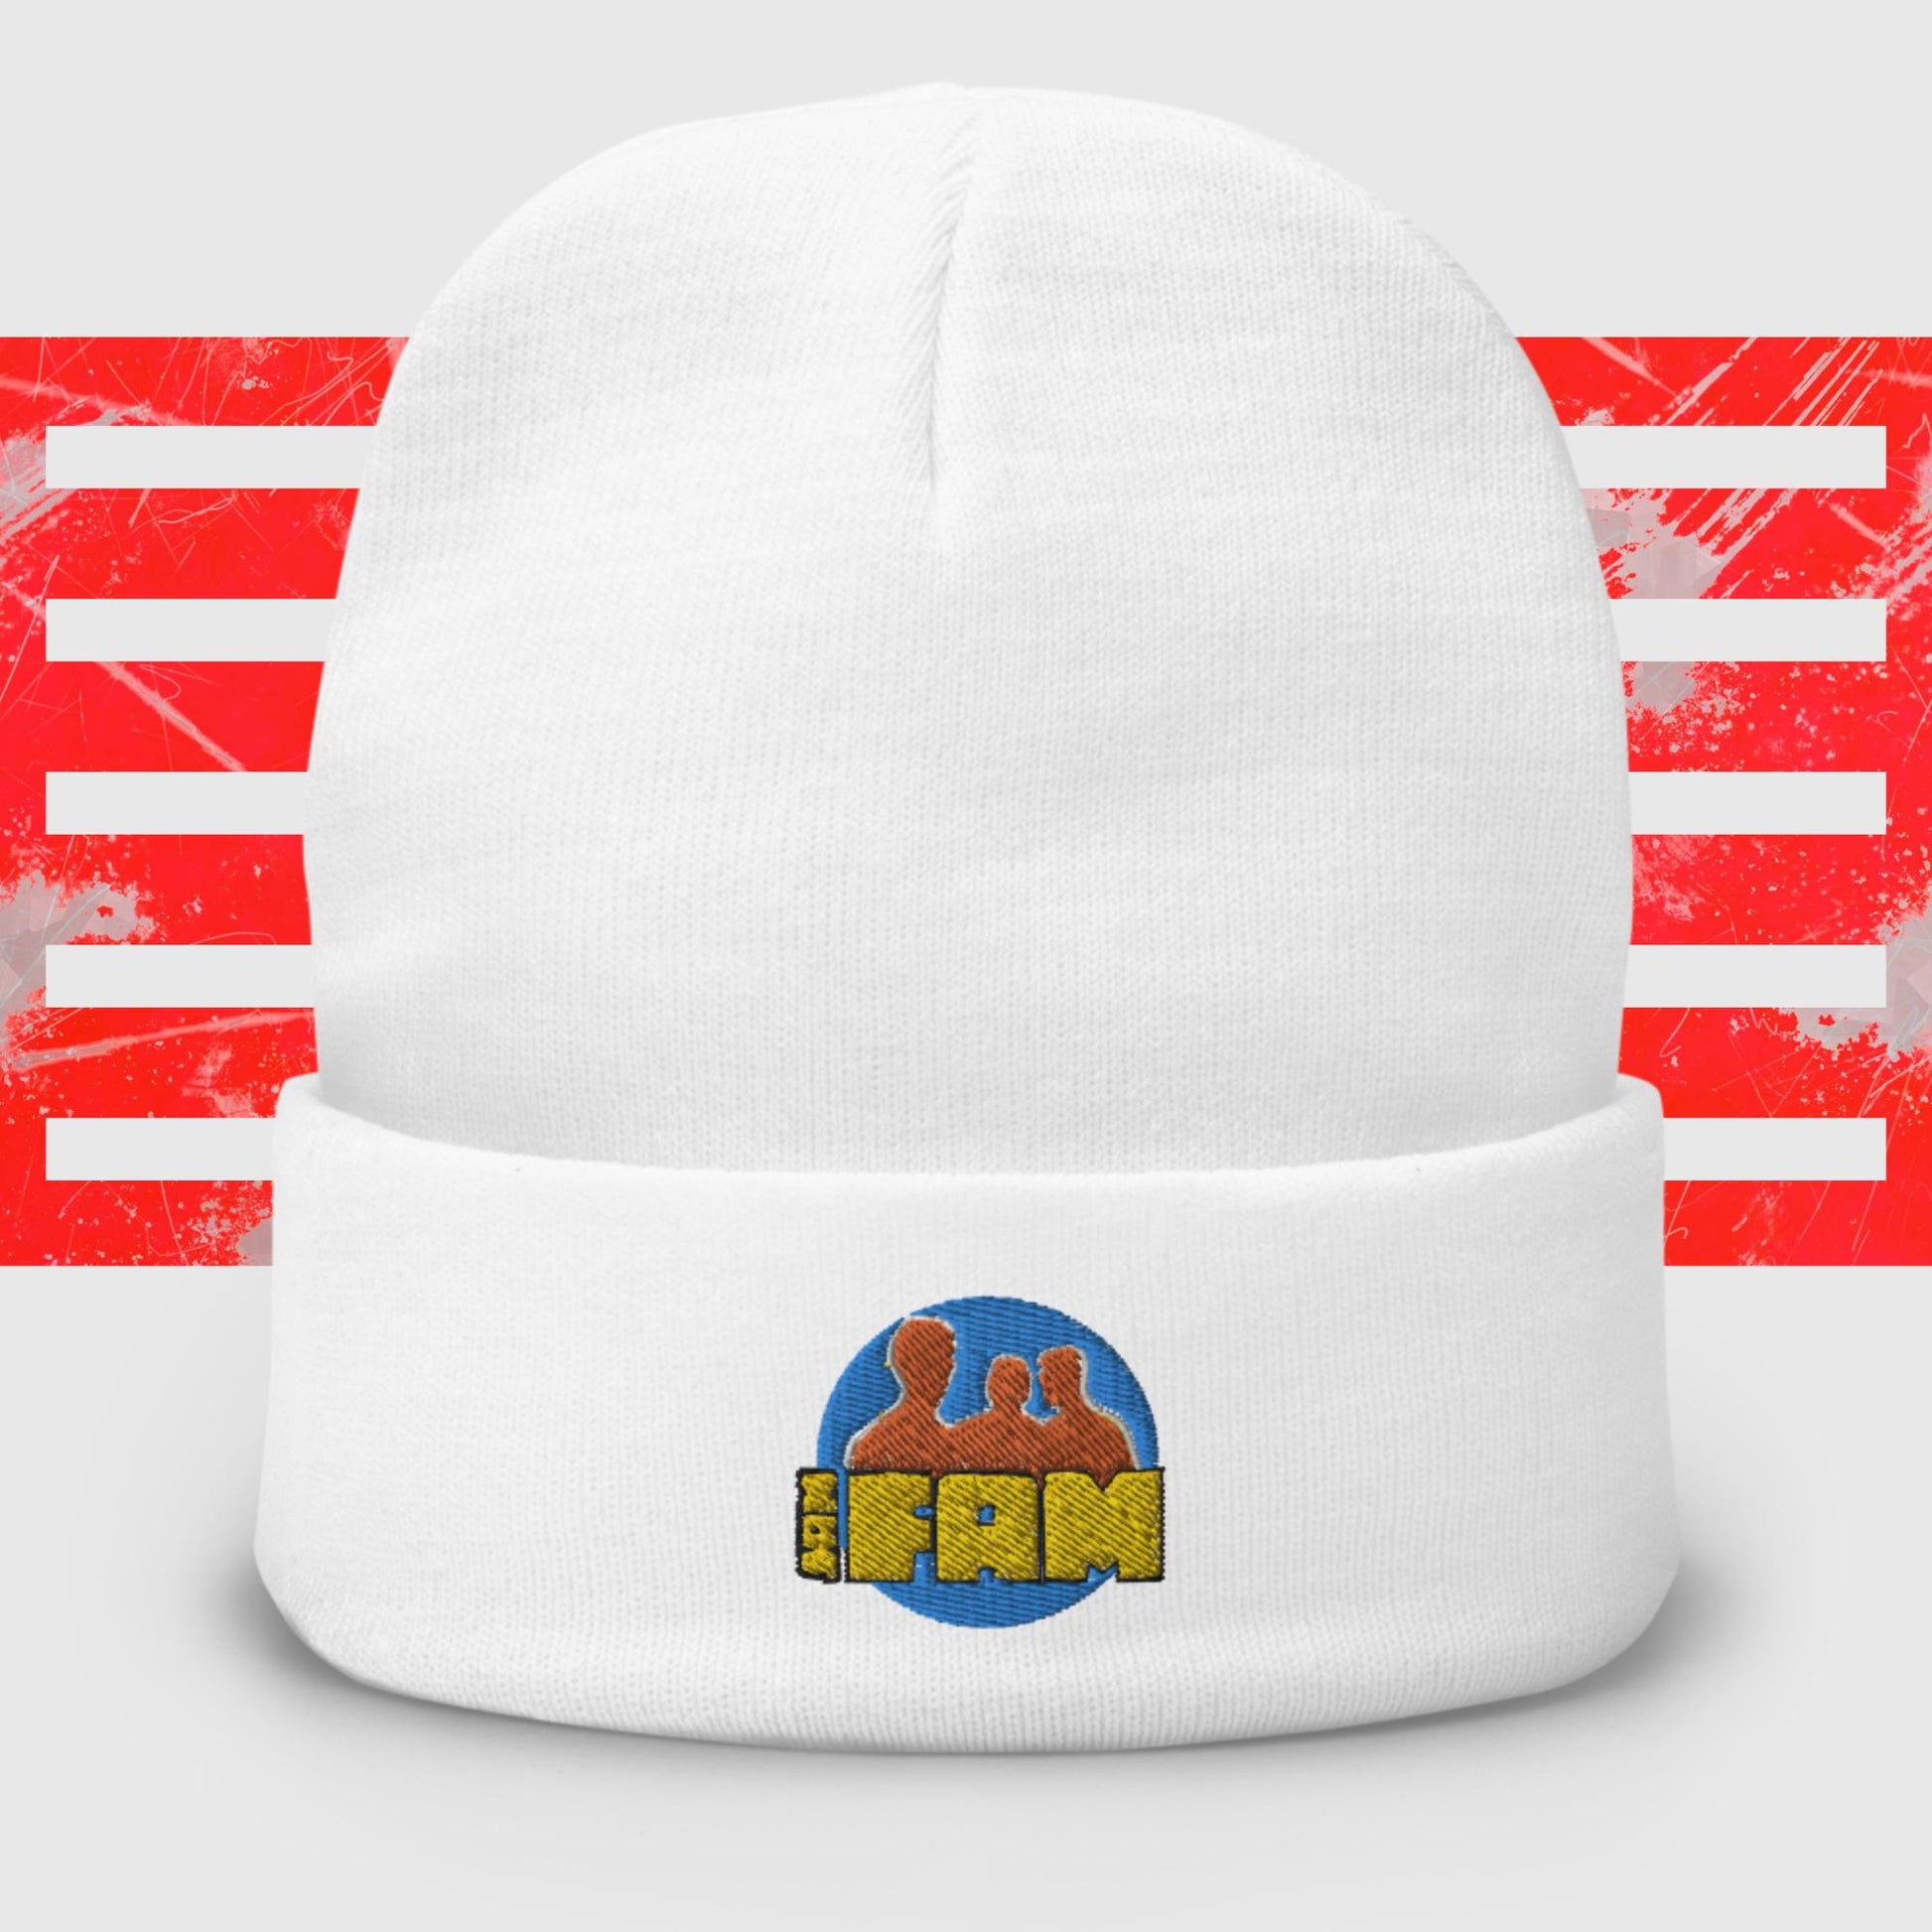 Jam Fam Embroidered Beanie Retro Smooth Vibes